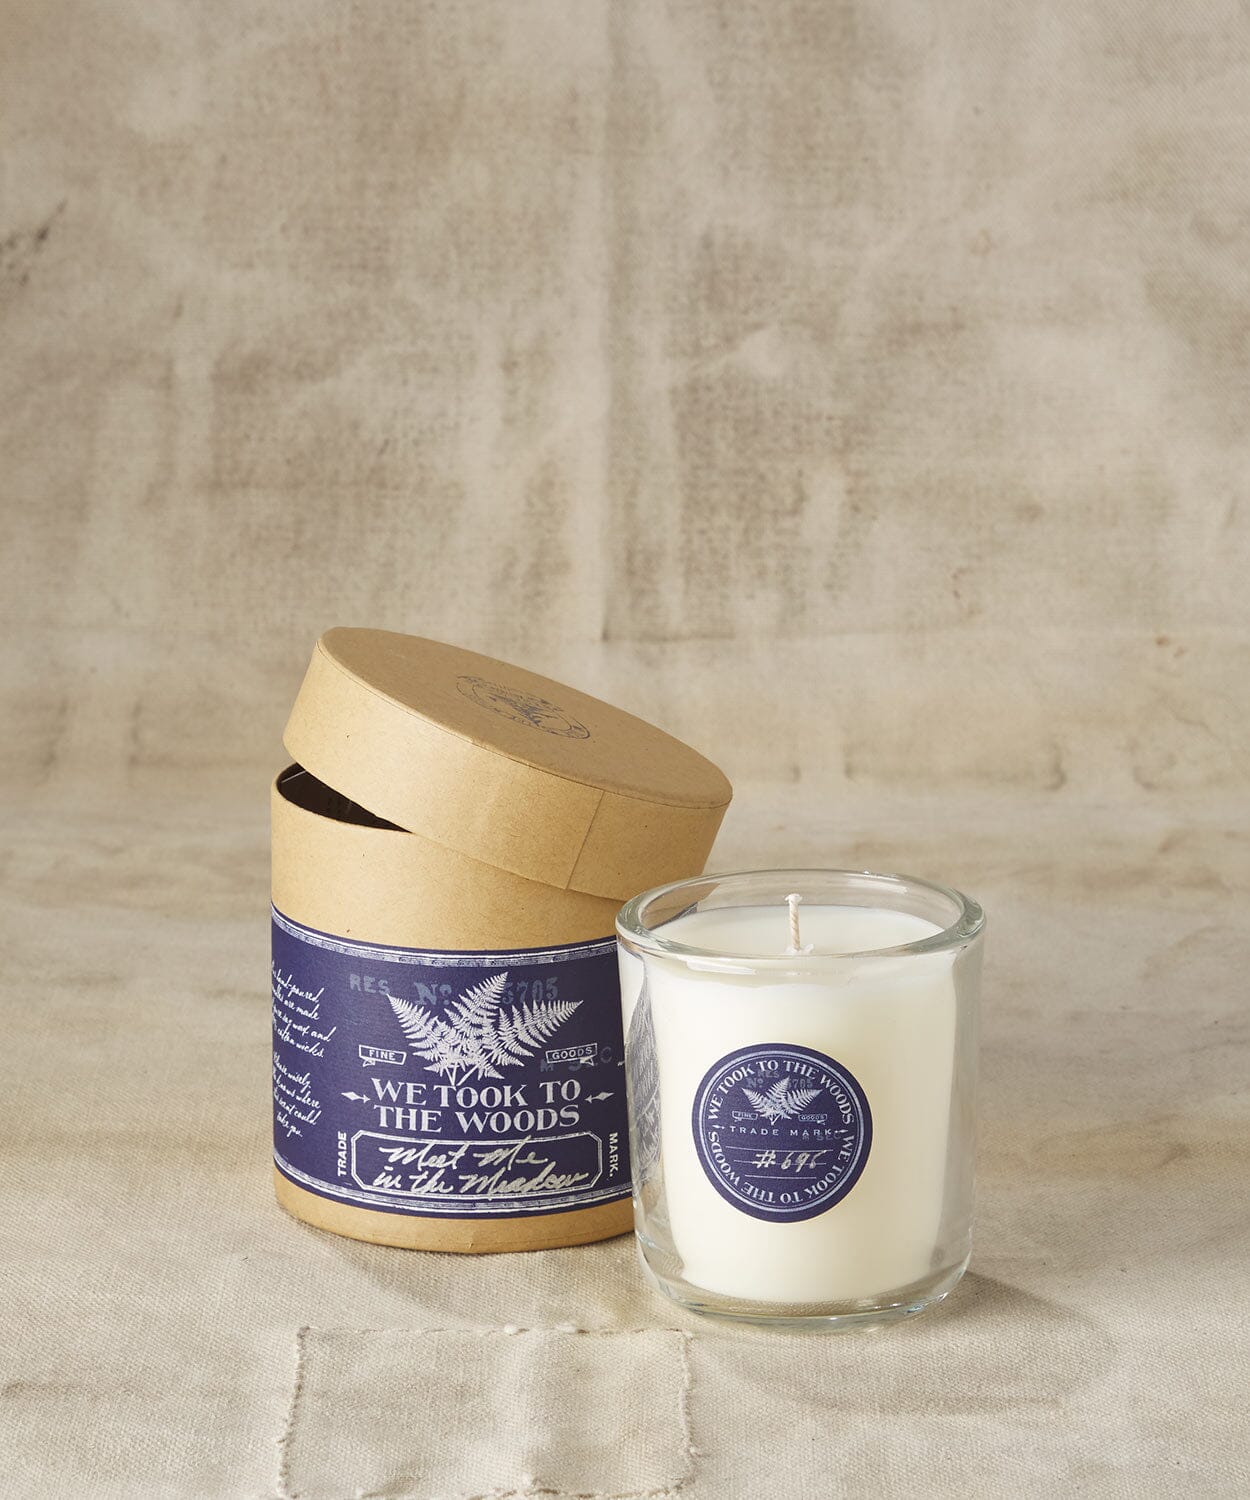 Meet Me in the Meadow Glass Indigo Candle